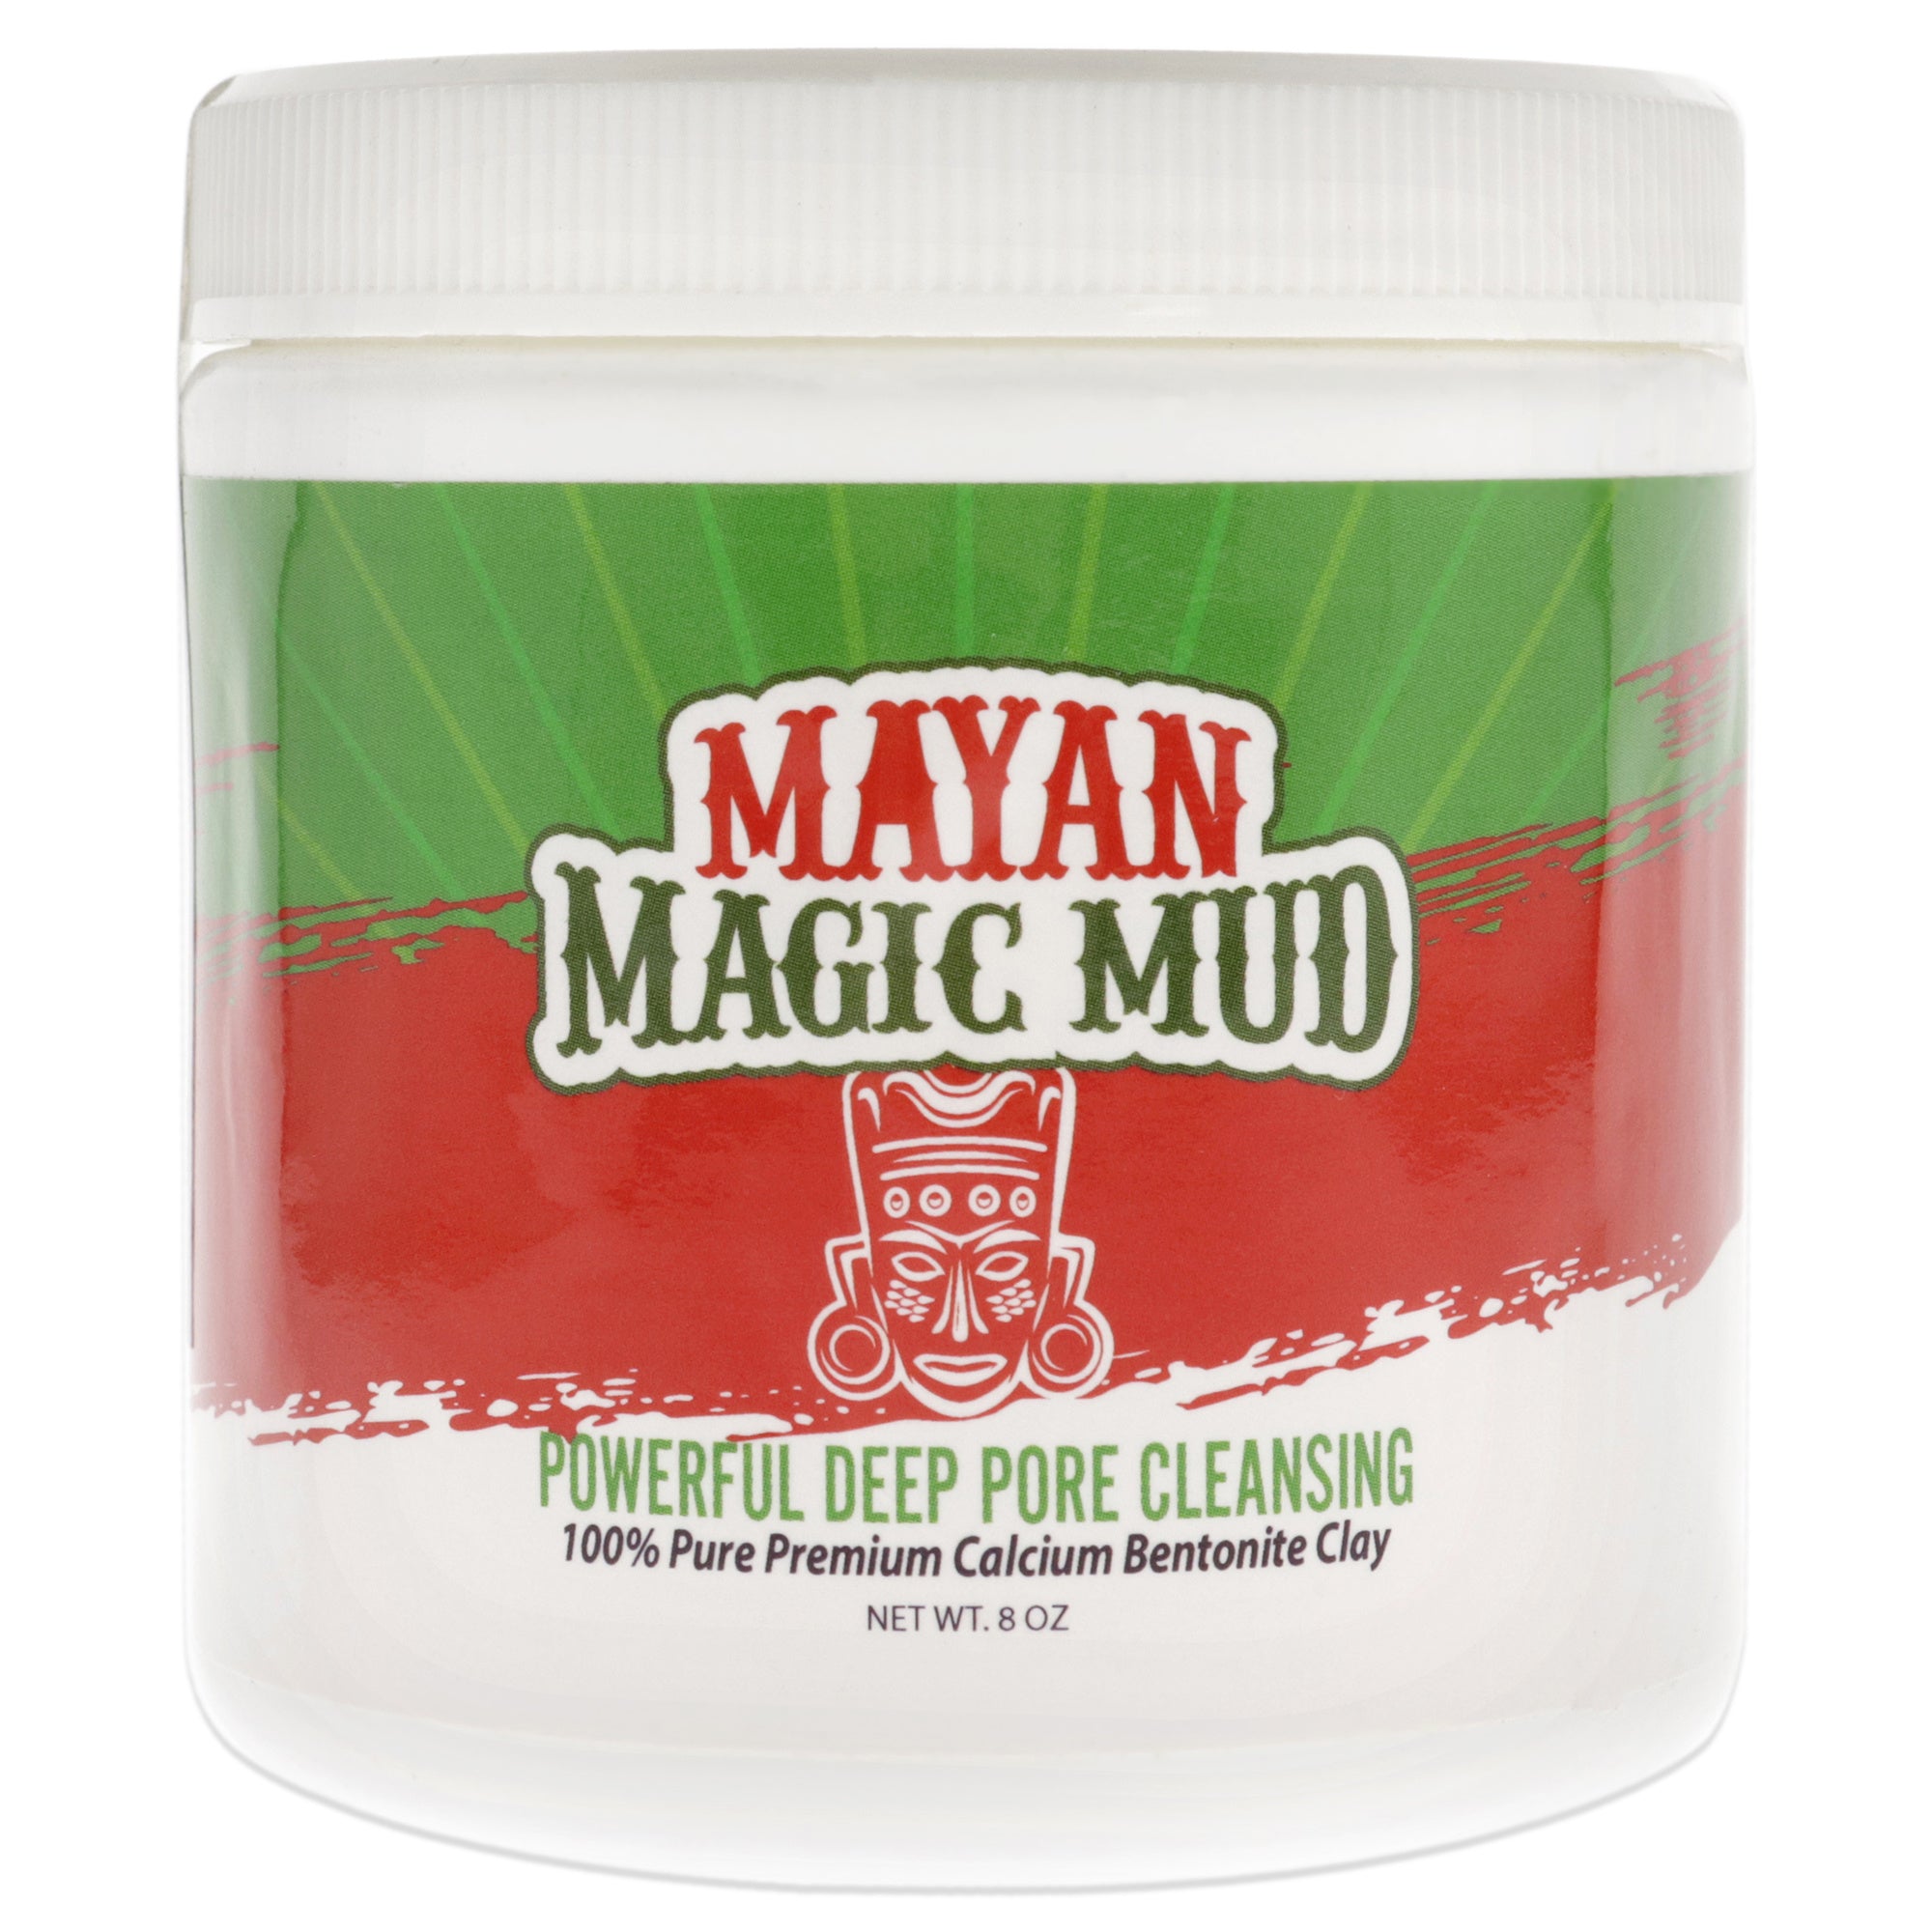 Powerful Deep Pore Cleansing Clay by Mayan Magic Mud for Unisex - 8 oz Cleanser